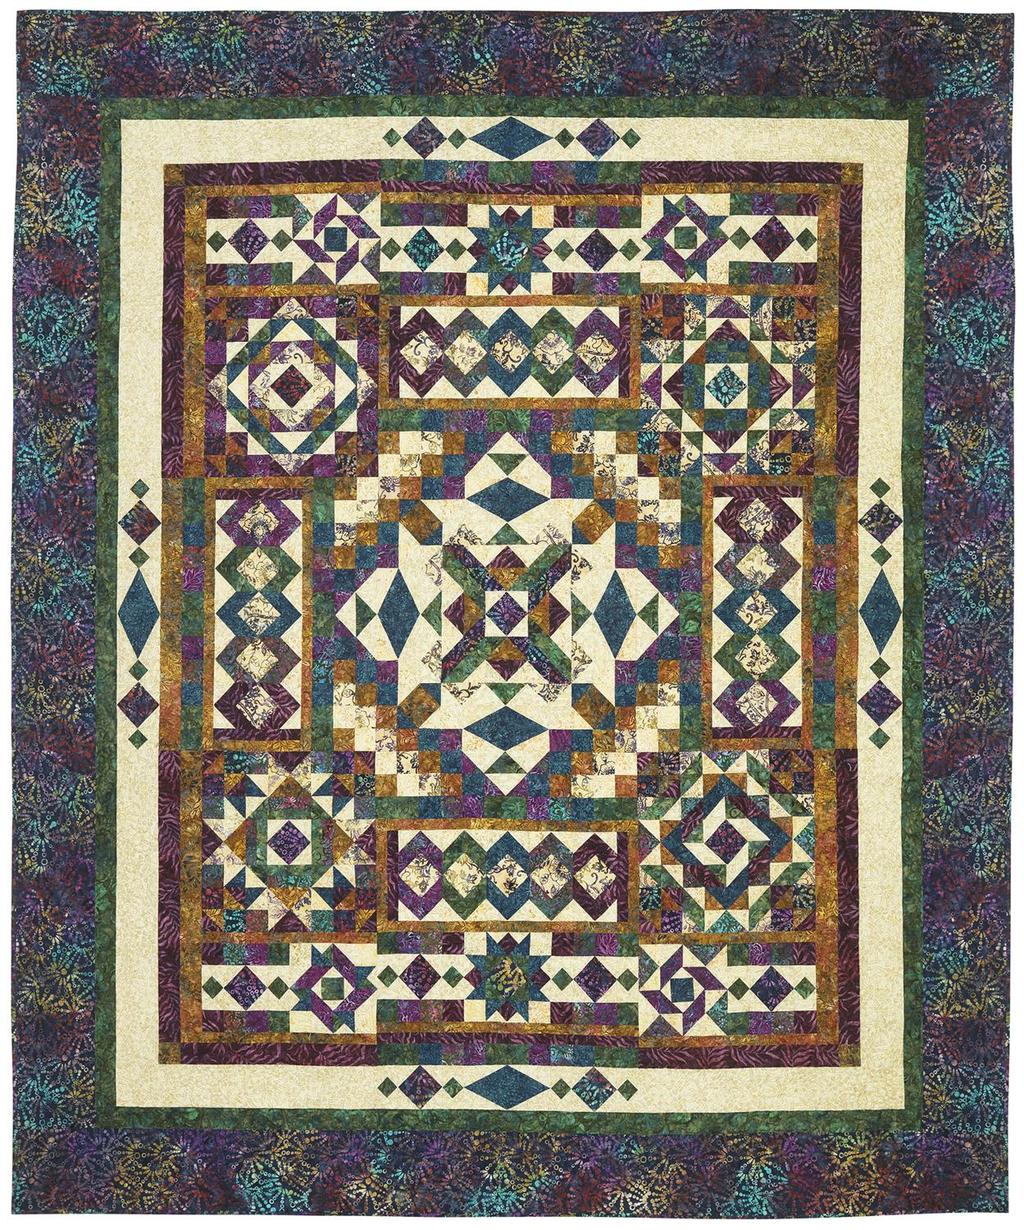 Check out the new BOM starting in October of this year! Gemstone By Wing and a prayer All batik fabric by Timeless Treasures This will be a 12 month block of the month! Registration: $10.